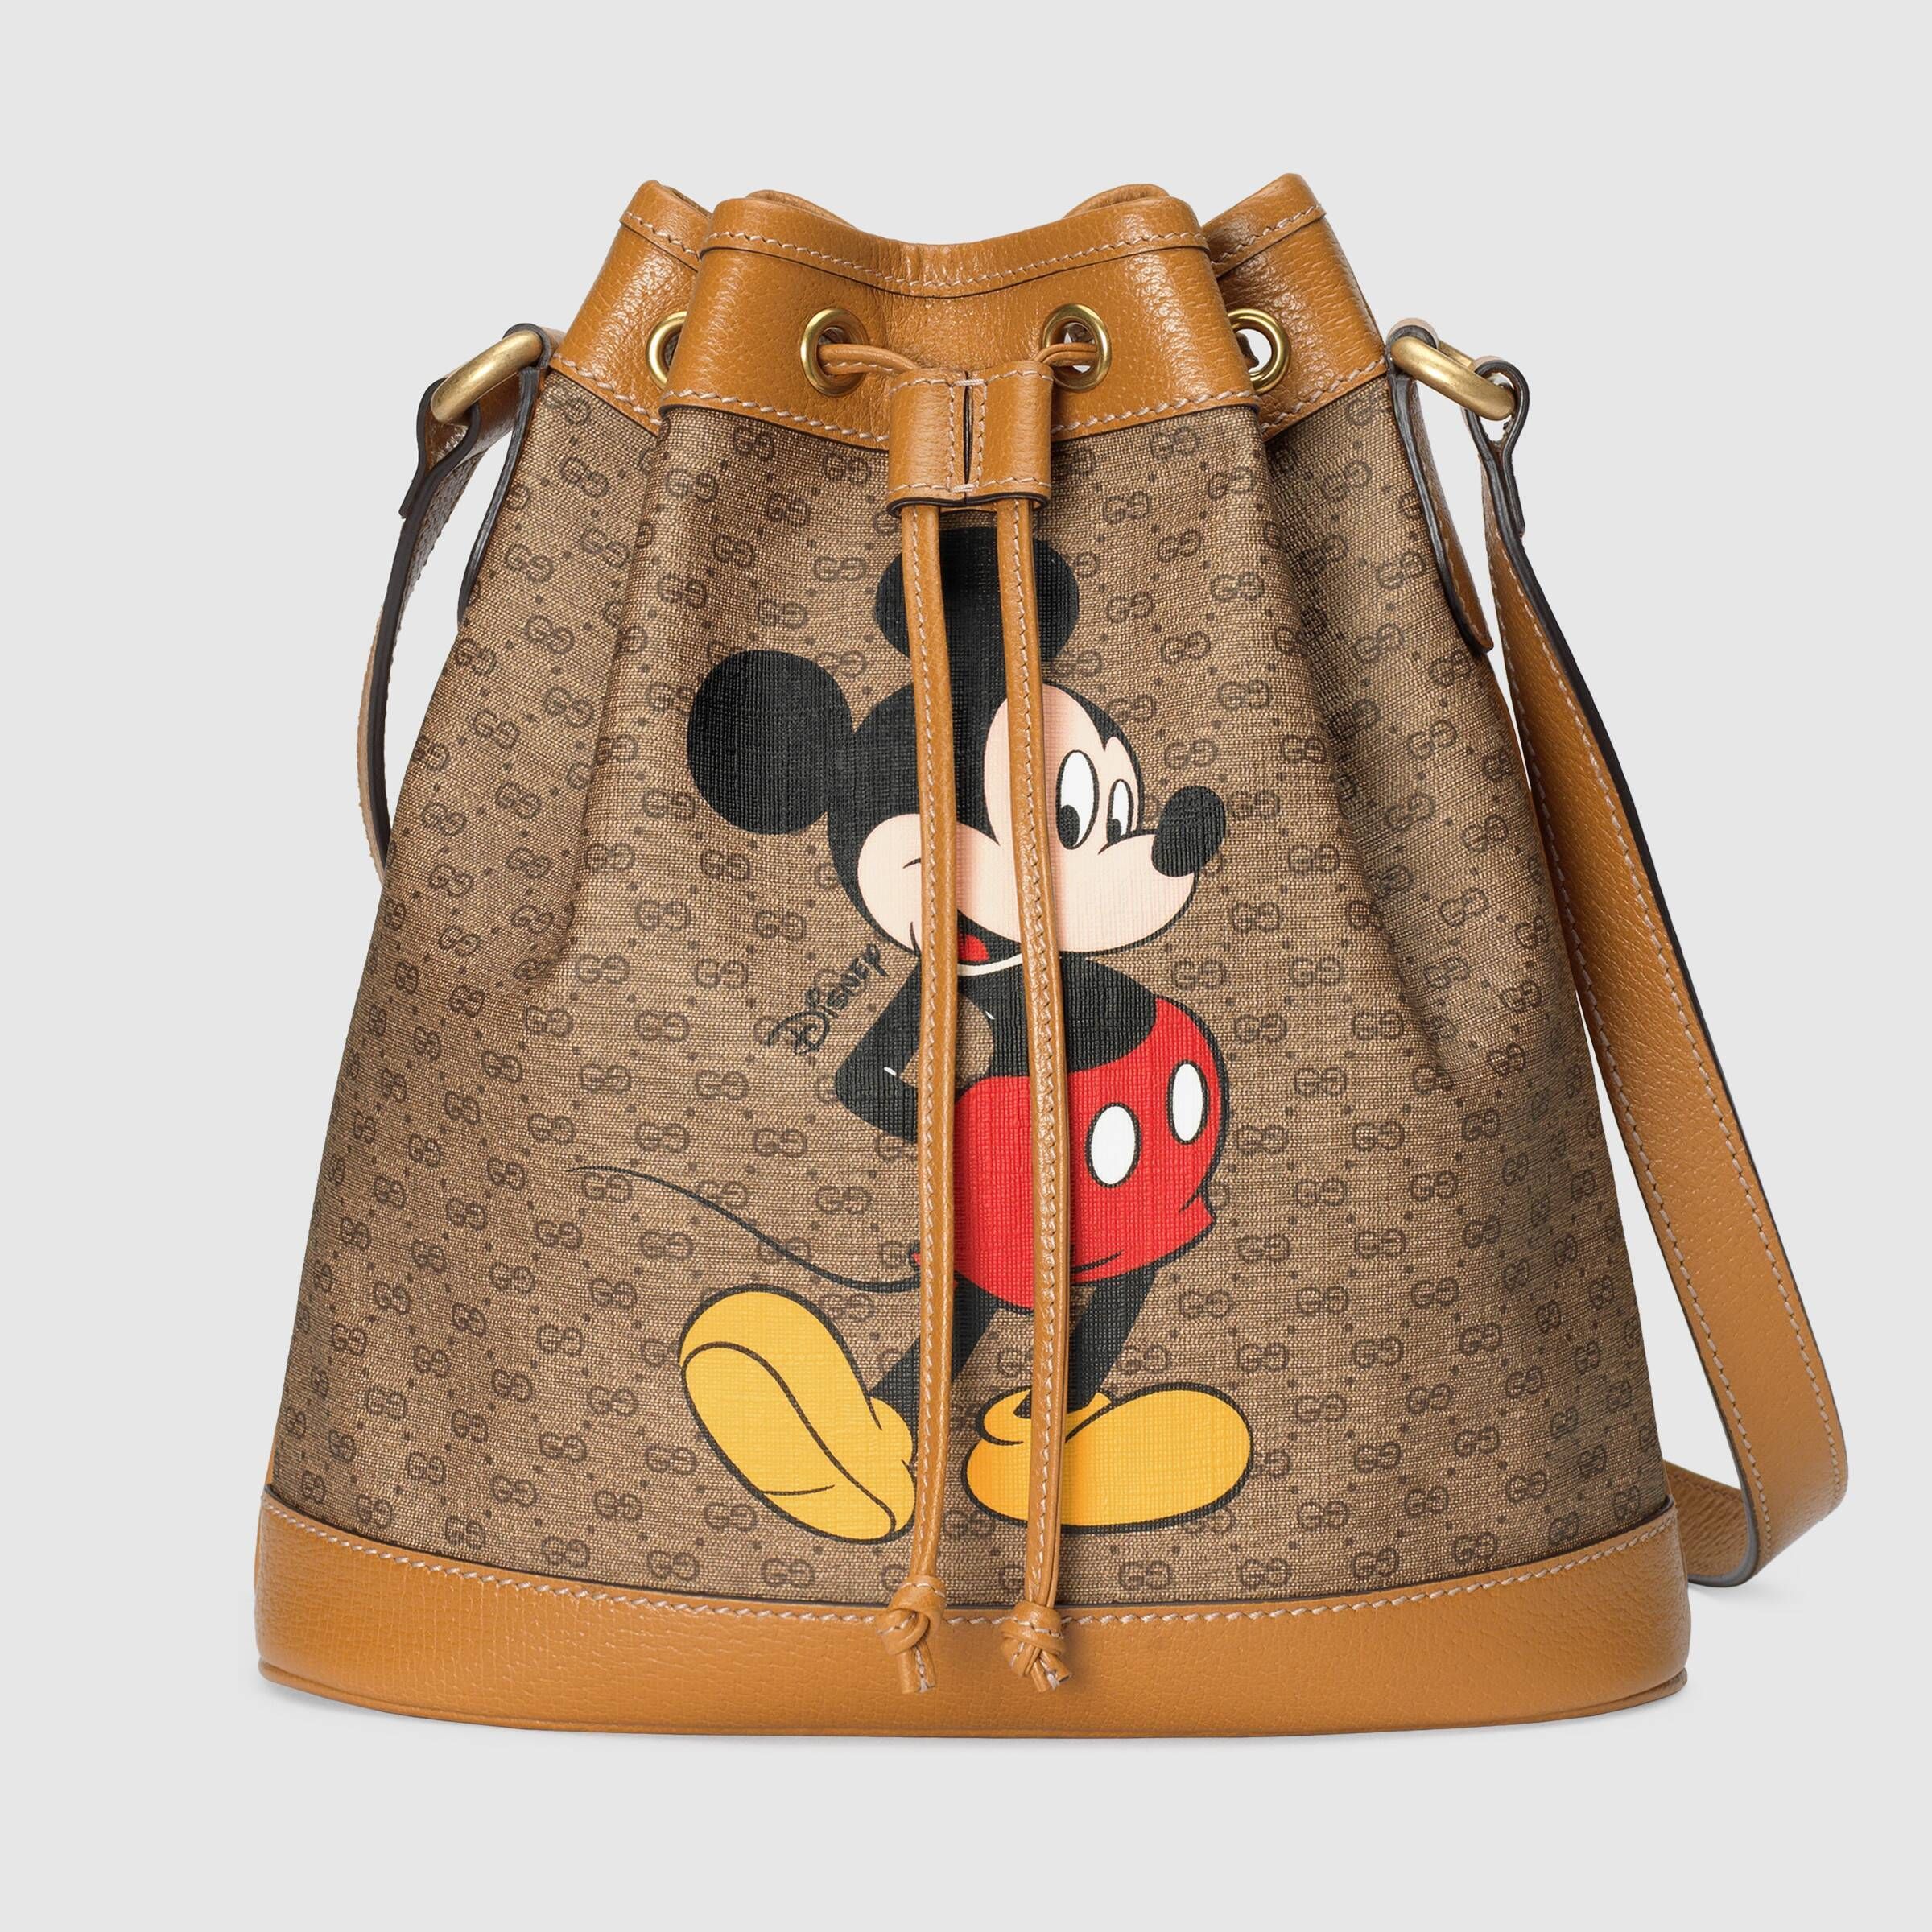 x Disney: Shop the best according to an Editor